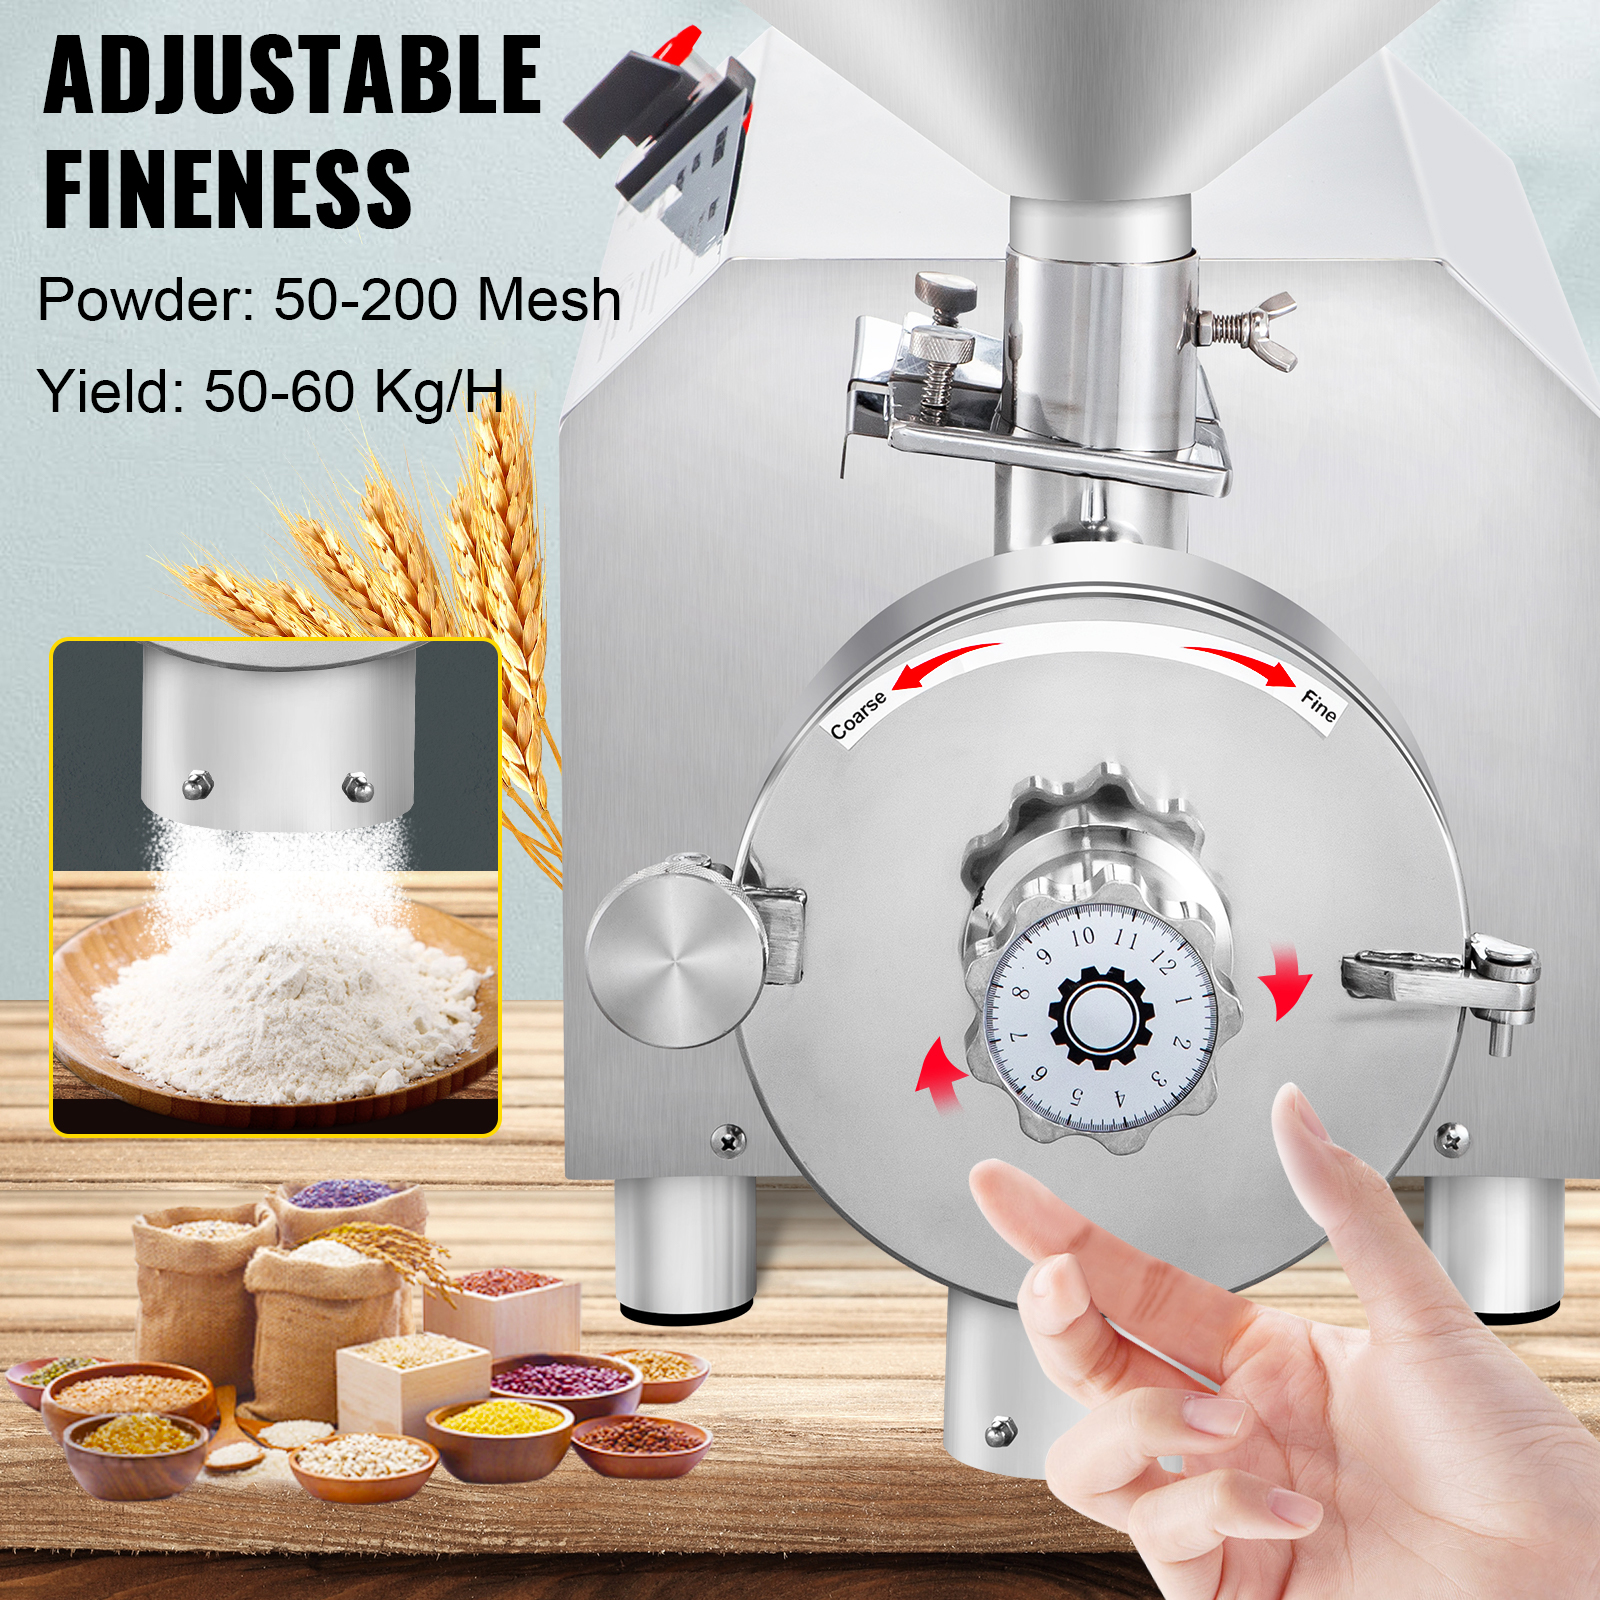 VEVOR 700g Electric Grain Mill Grinder High Speed 2500W Commercial Spice Grinders Stainless Steel Pulverizer Powder Machine for Dry Herbs Grains